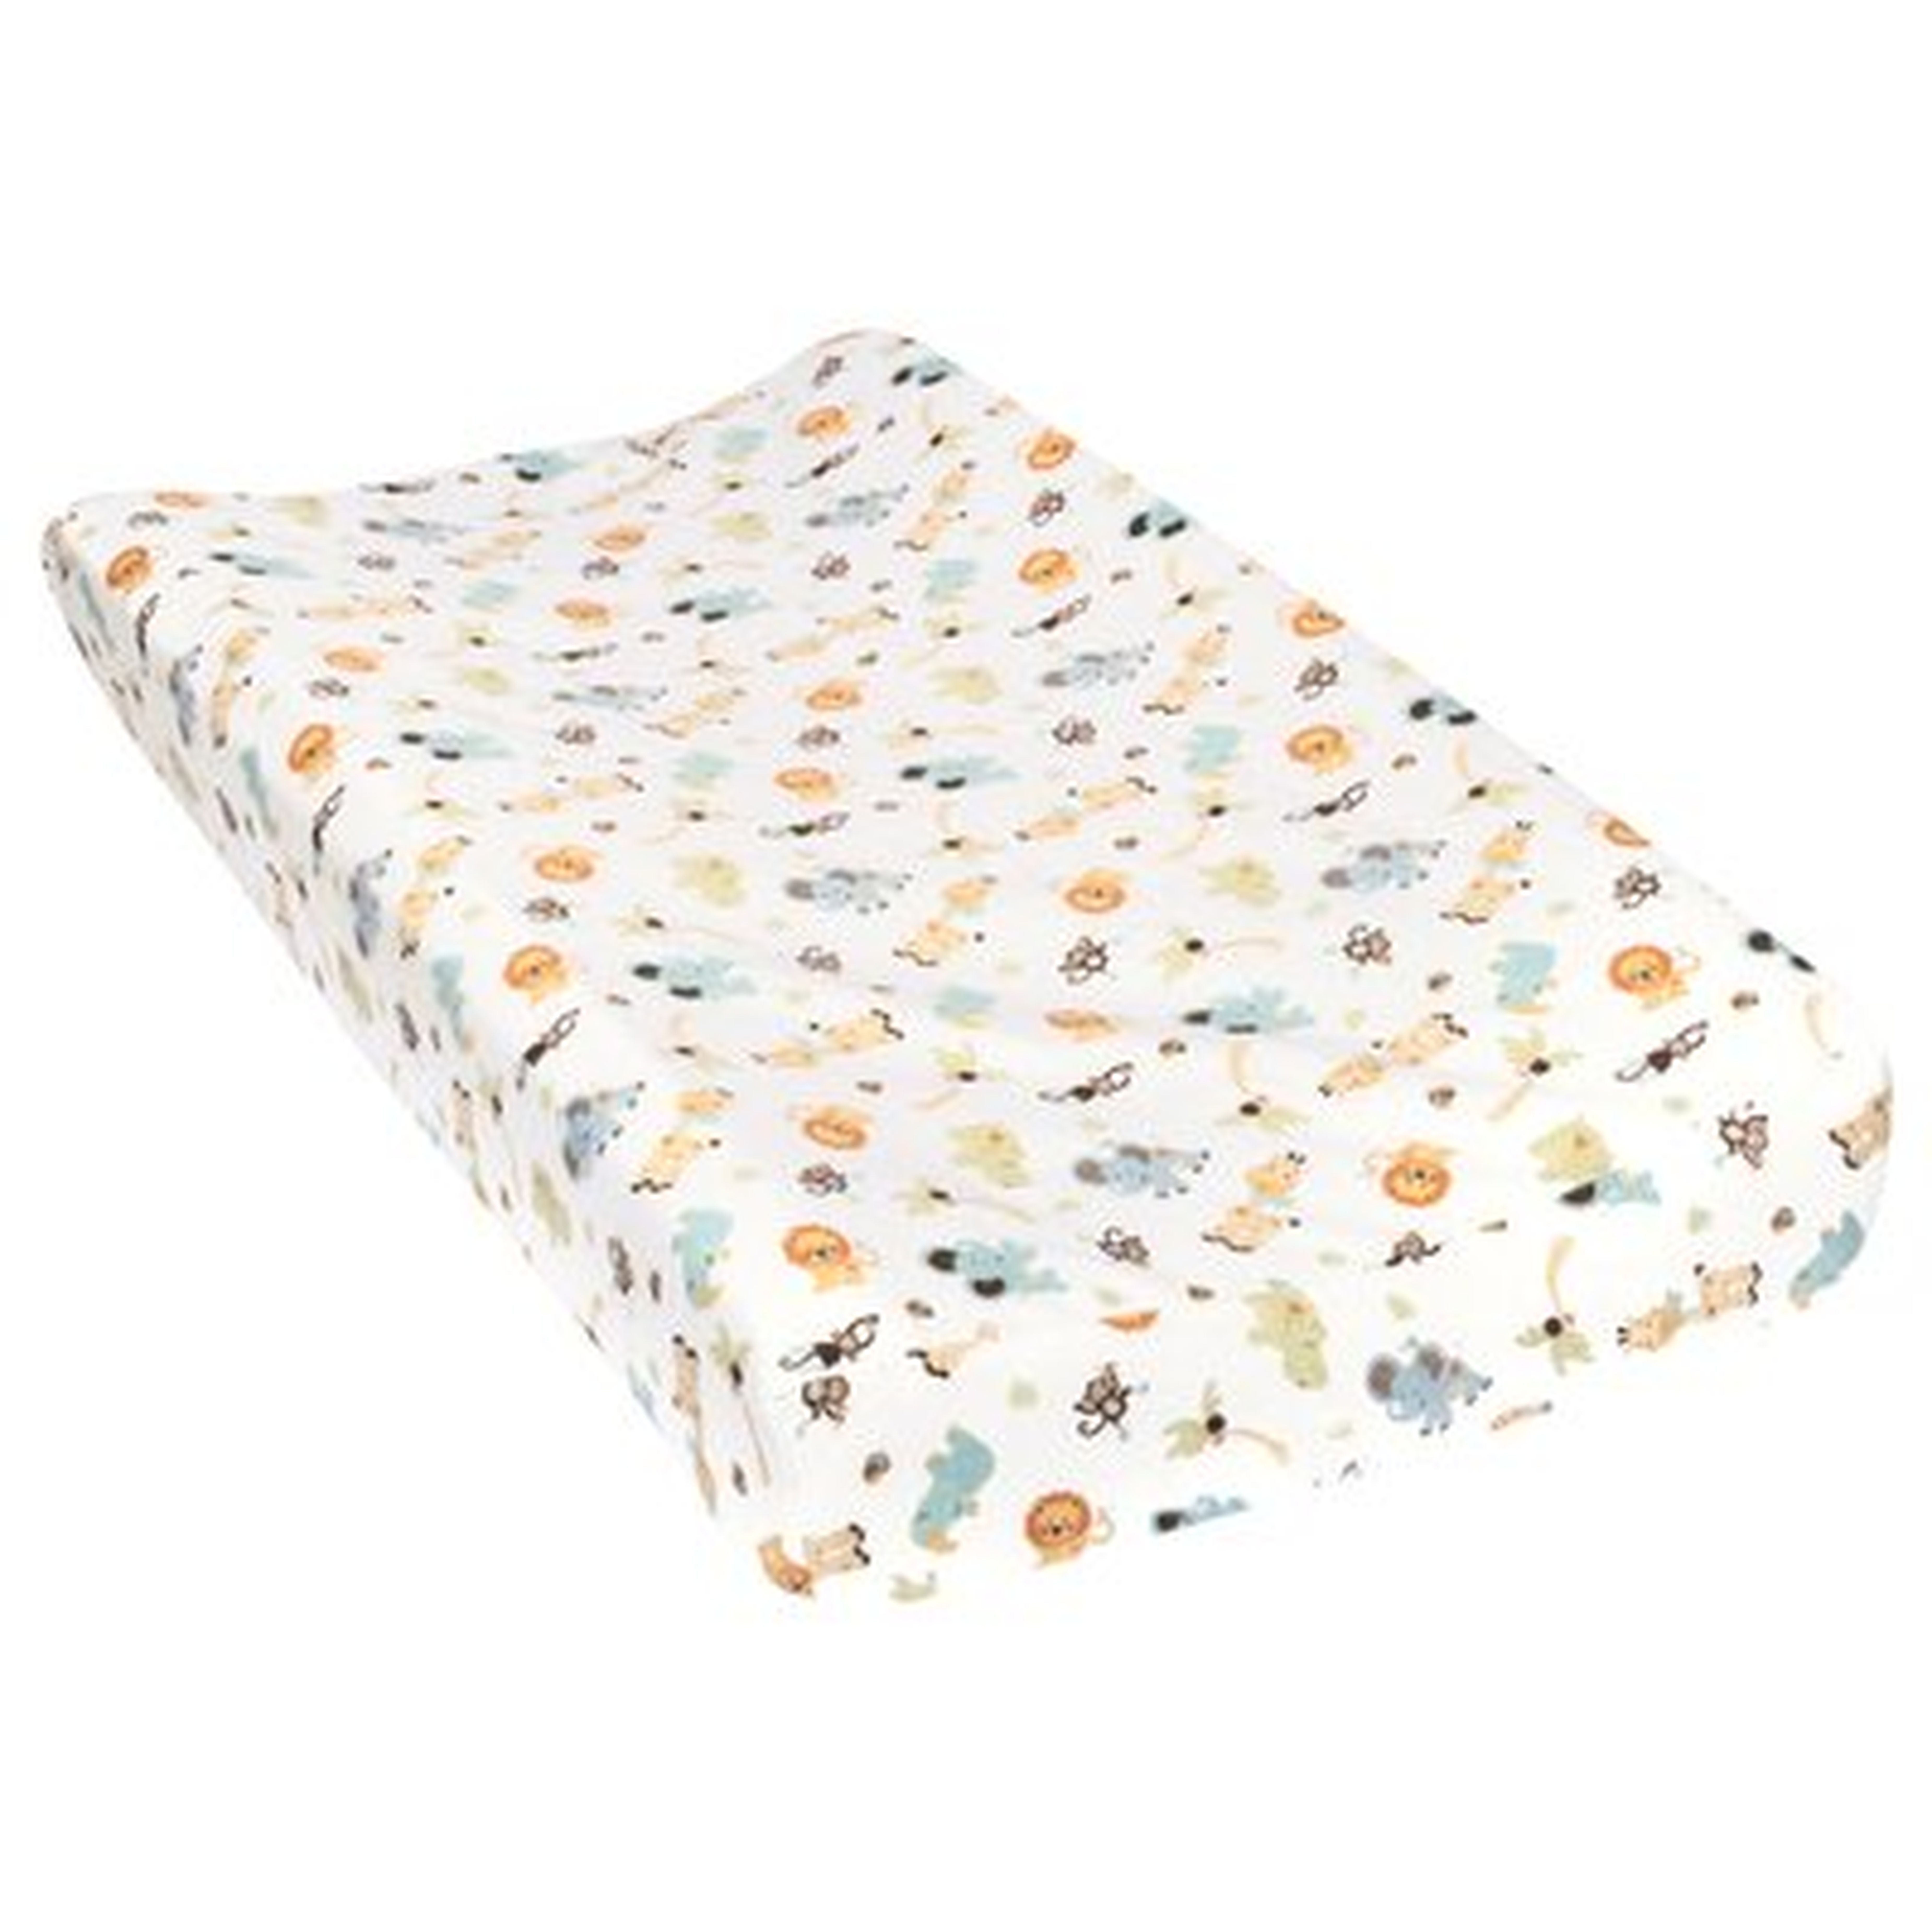 Treadwell Jungle Friends Deluxe Flannel Changing Pad Cover - Wayfair